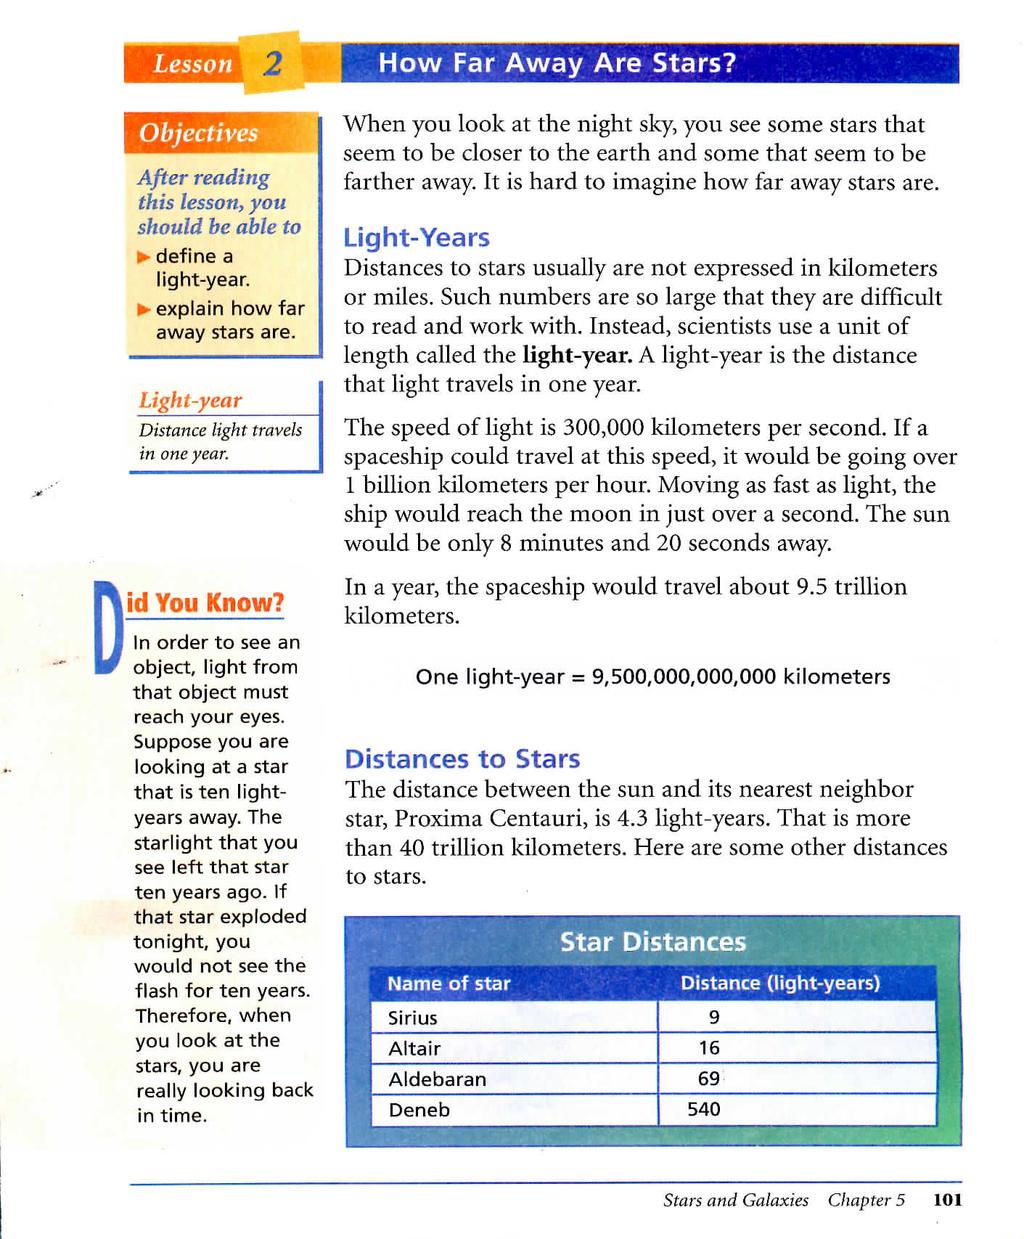 Lesson Objectives After reading this lesson, you should he able to define a light-year. ; explain how far away stars are. Light-year Distance light travels in one year. id You Know?